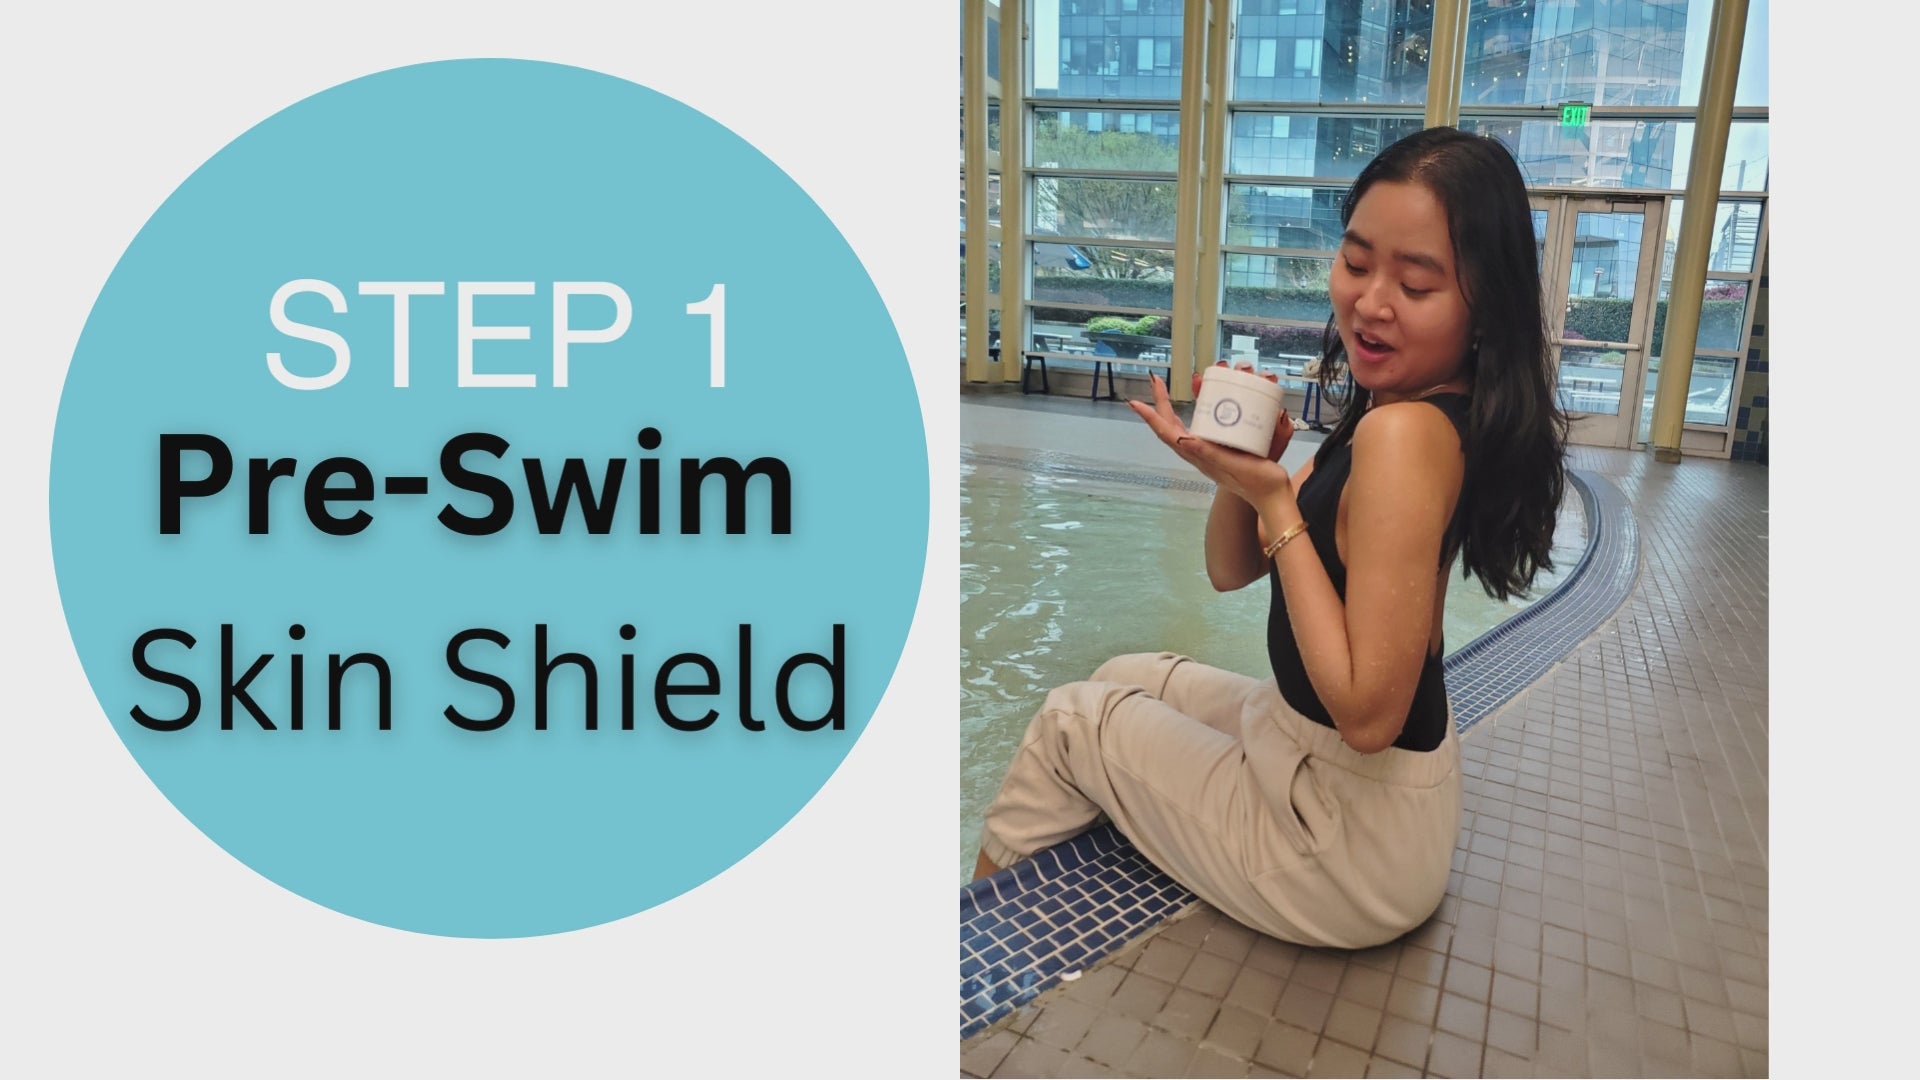 Load video: Swim Silk Skin Care for Swimmers 3 step instructions for use